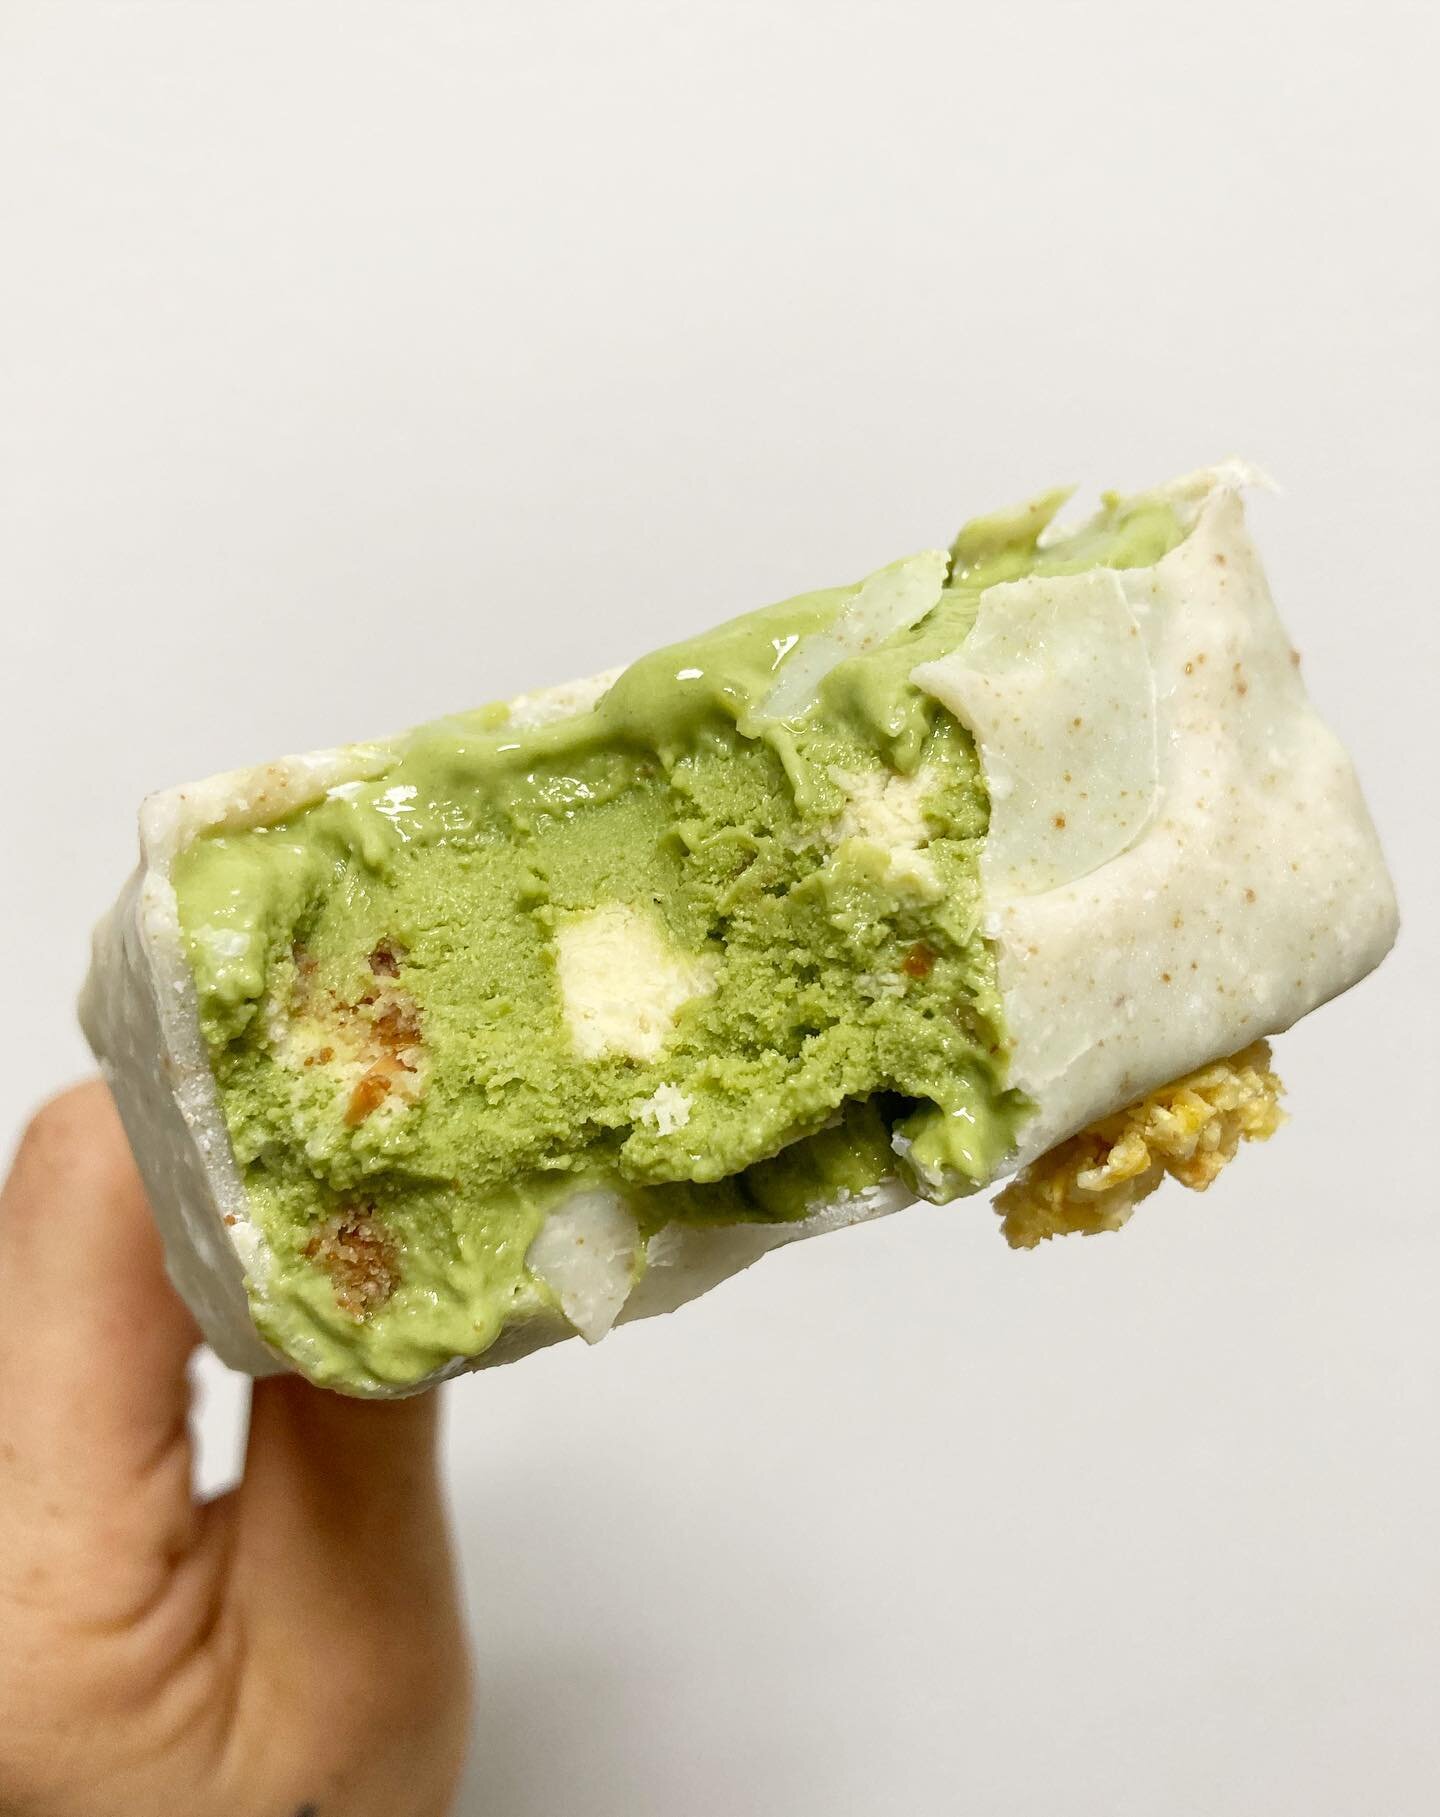 Matcha Ice Cream Bar... with chunks of Cheezecake and blips of pineapple. Coconut butter shell.
Made here. We even make the coconut butter. Because we are hardcore diy folks and love knowing what goes in to our food that we offer to the people of thi